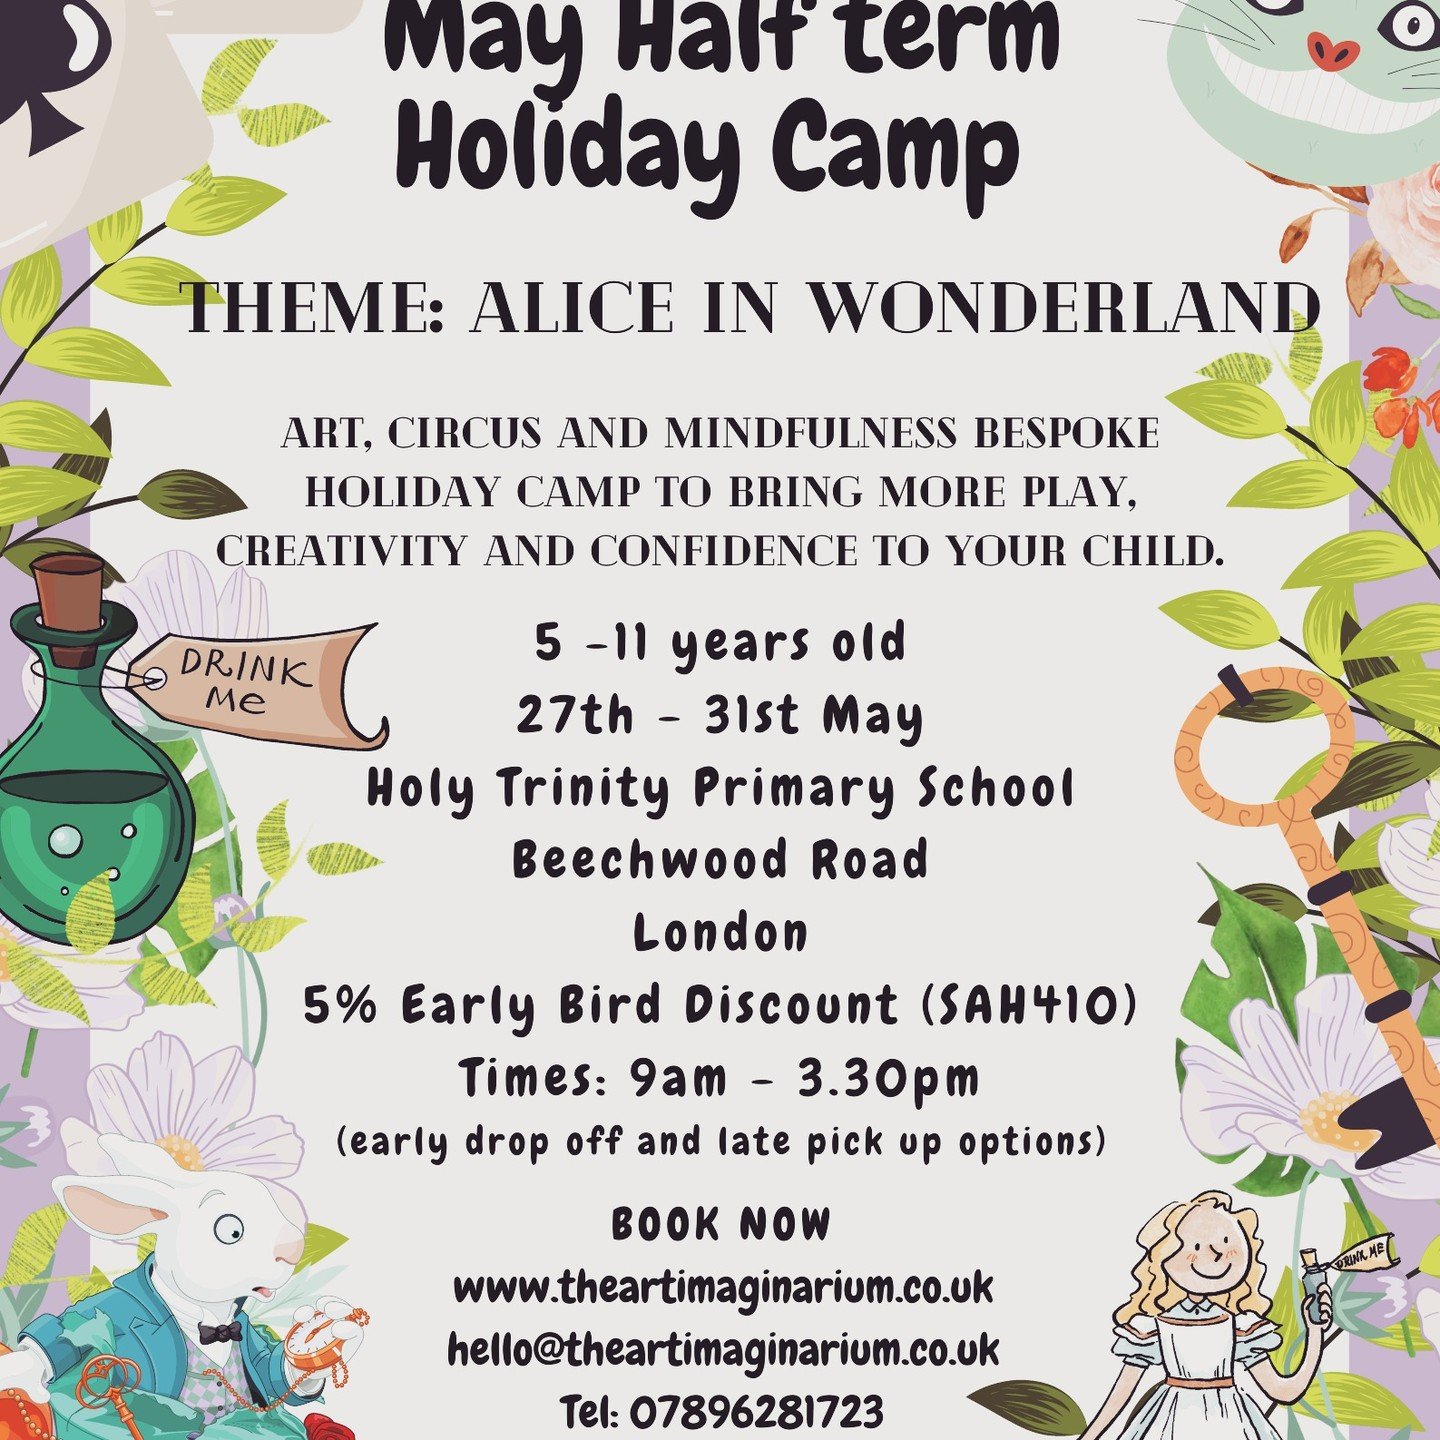 May Half Term Holiday Camp Now Open For Bookings!!

Dates: 28th - 31st May

Theme: Alice in Wonderland

This will be a fun-filled and creative week where the children will make everything from: cheshire cat masks, eat me crackers &amp; drink me mini 